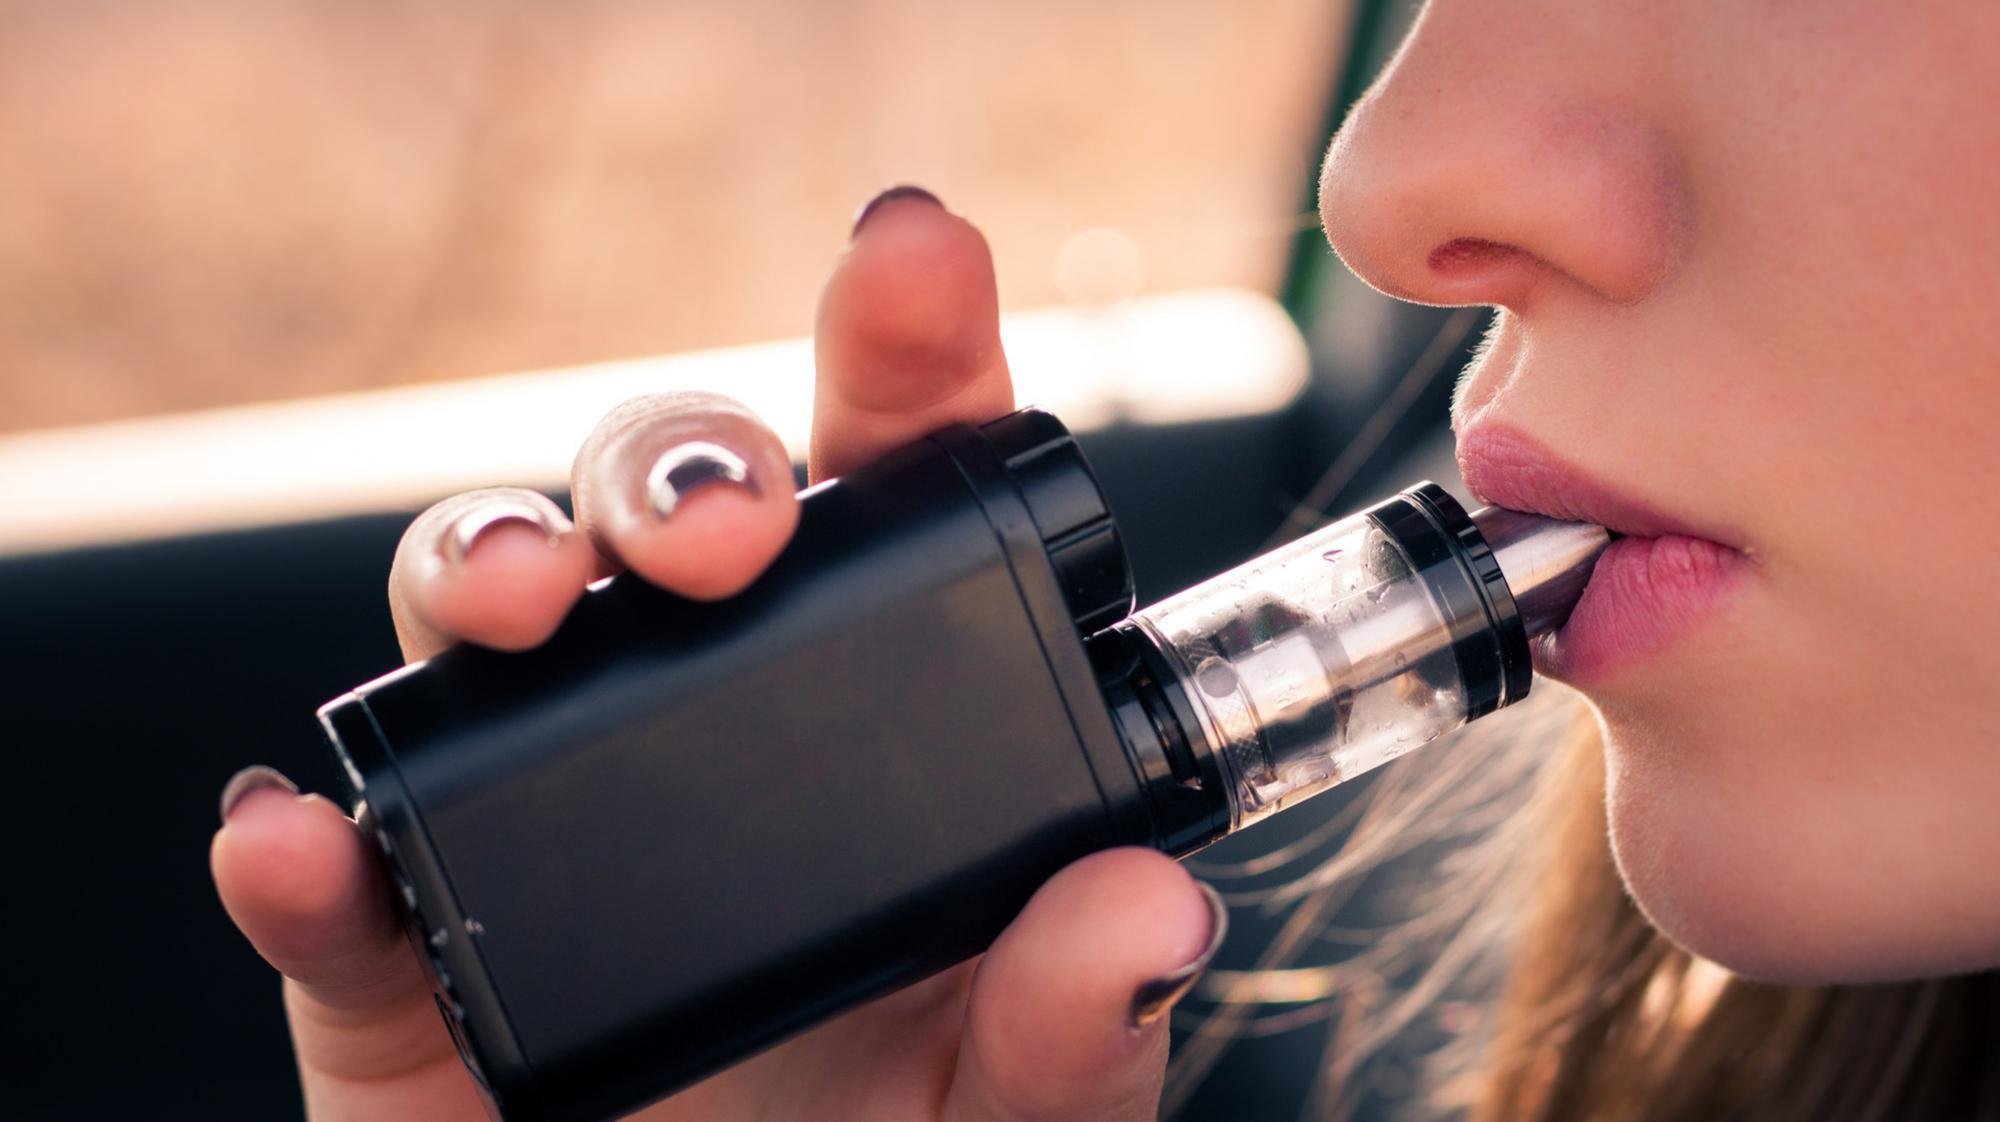 All You Need To Know About Getting Weed Vaporizers Online